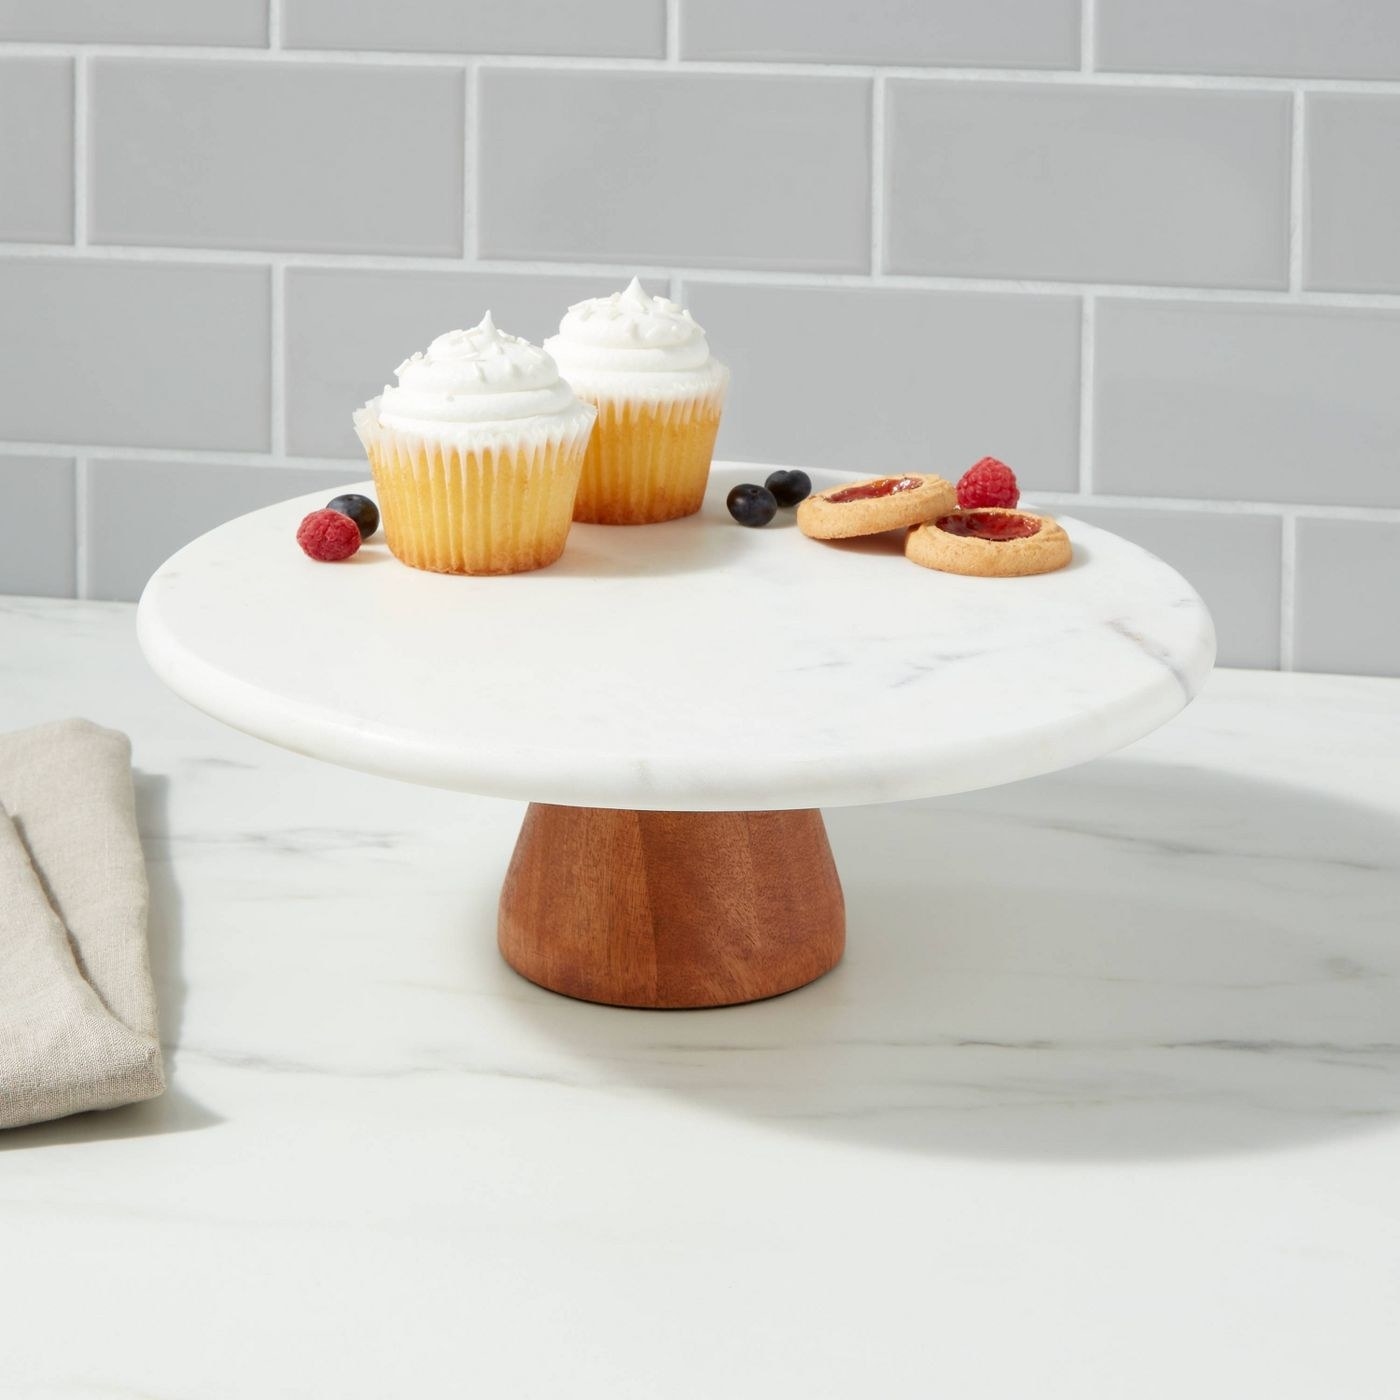 cupcakes and fruit on a marble cake stand with a wooden base